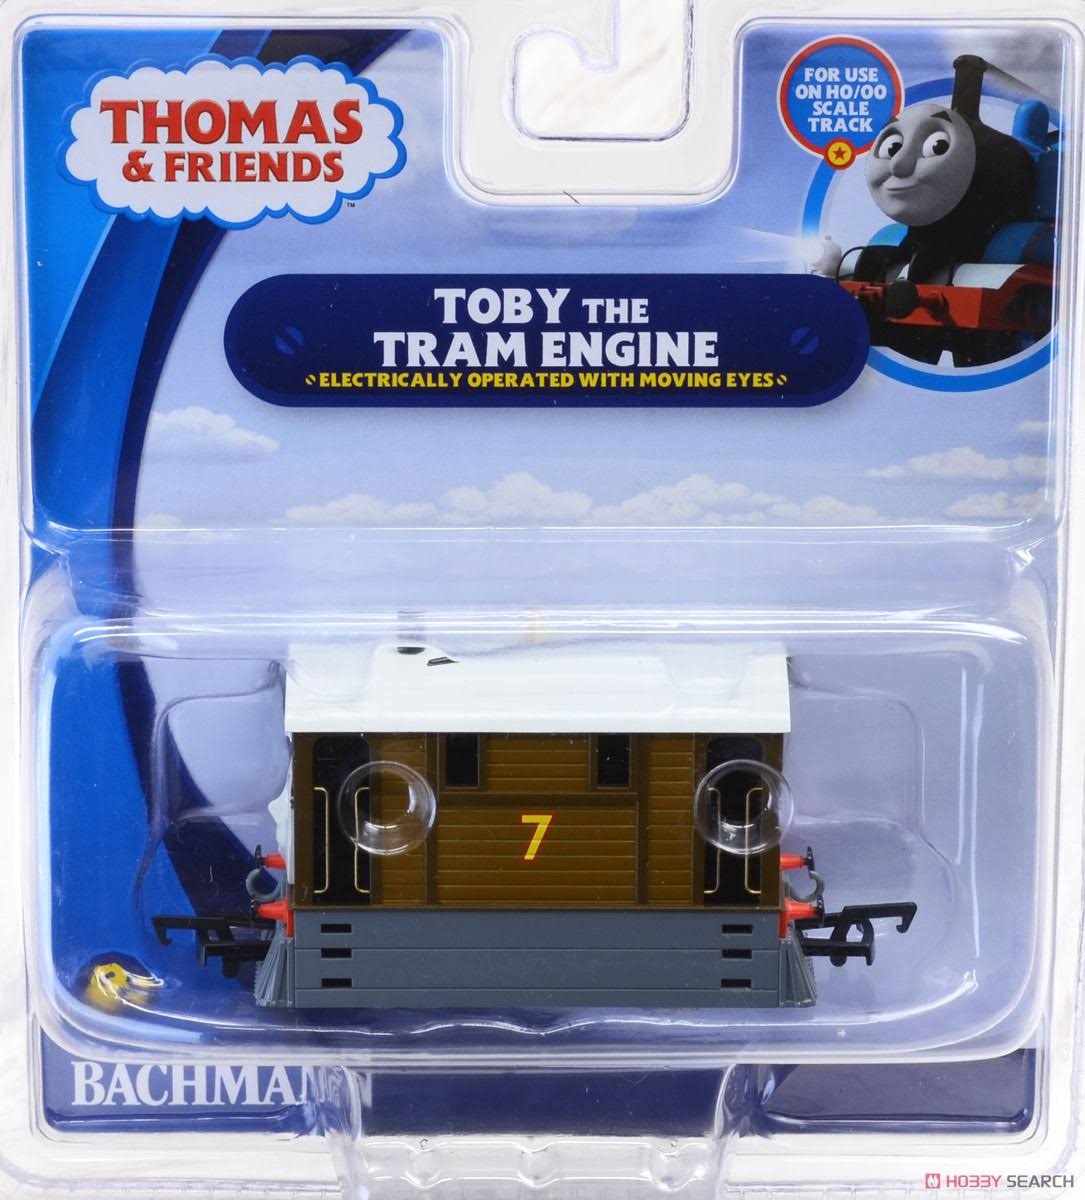 Bachmann Thomas and Friends Toby The Tram Engine Locomotive with Moving Eyes, HO Scale Train